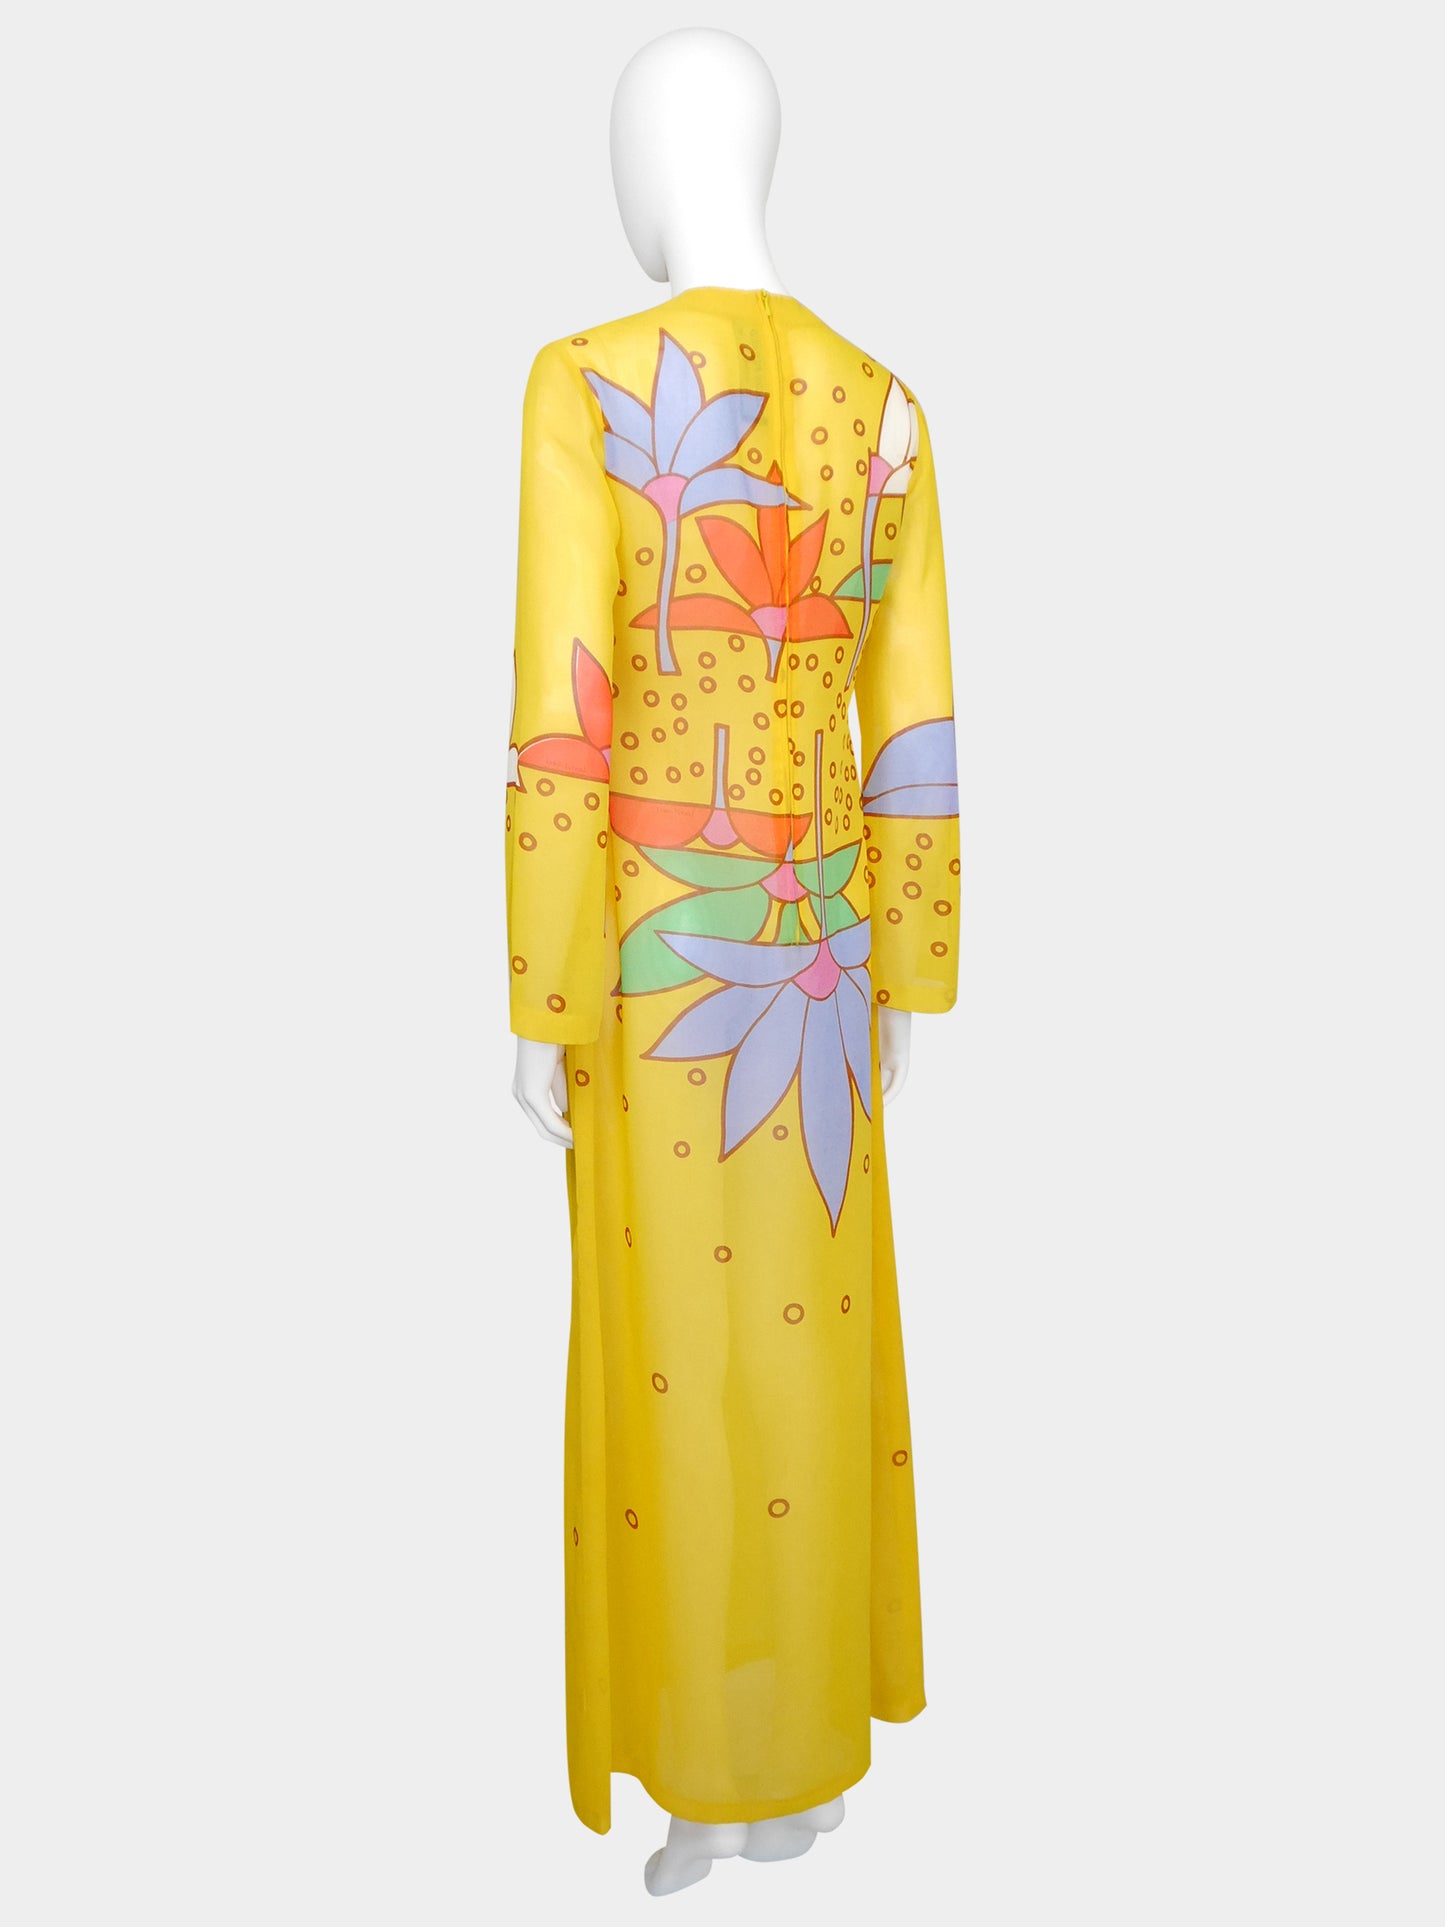 LOUIS FÉRAUD 1960s 1970s Vintage Yellow Graphic Print Maxi Dress Gown Size S